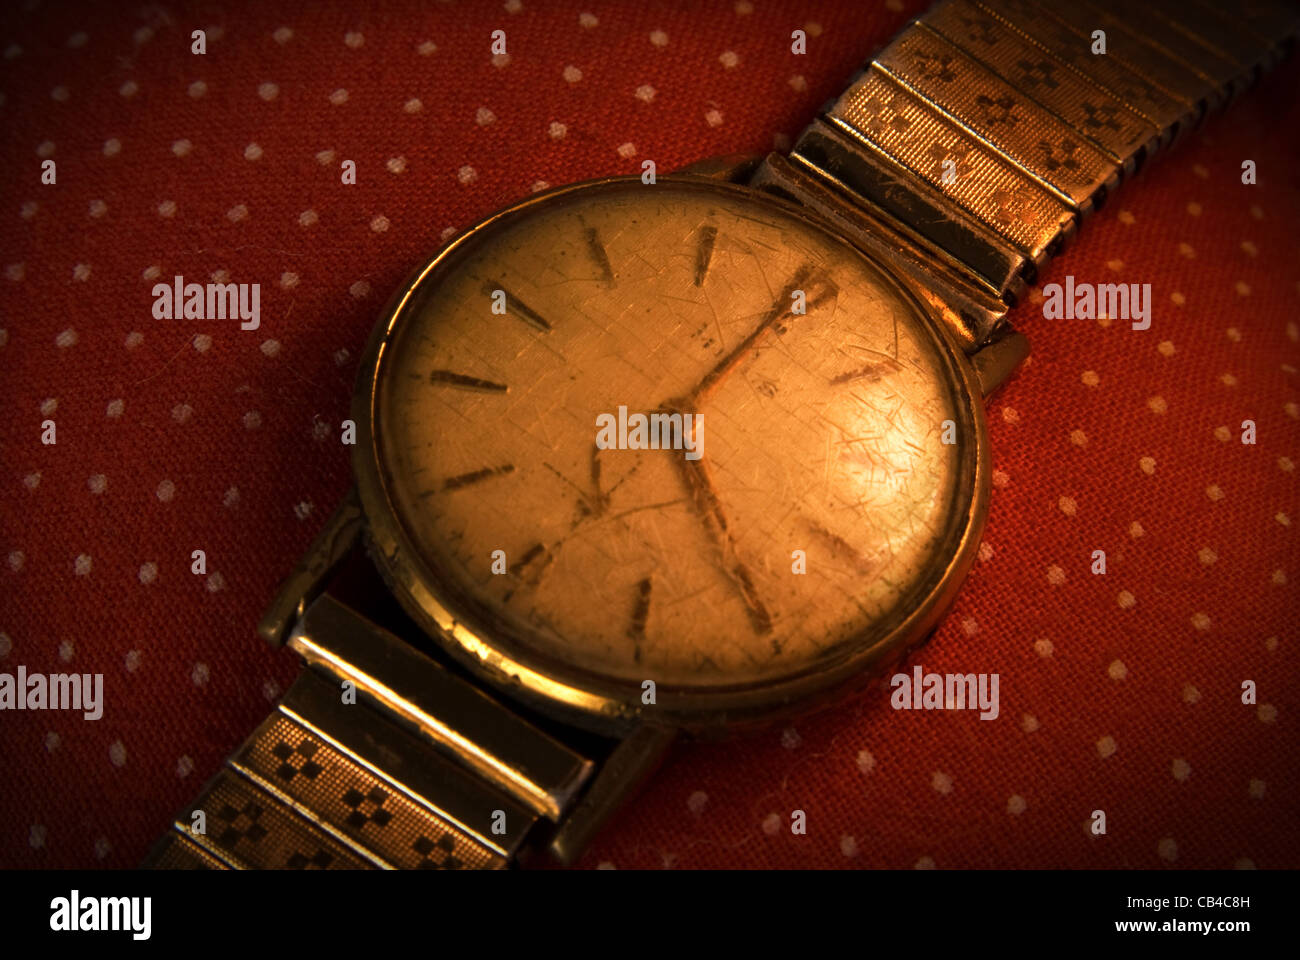 Retro golden wristwatch close up on red vintage cloth background. Stock Photo